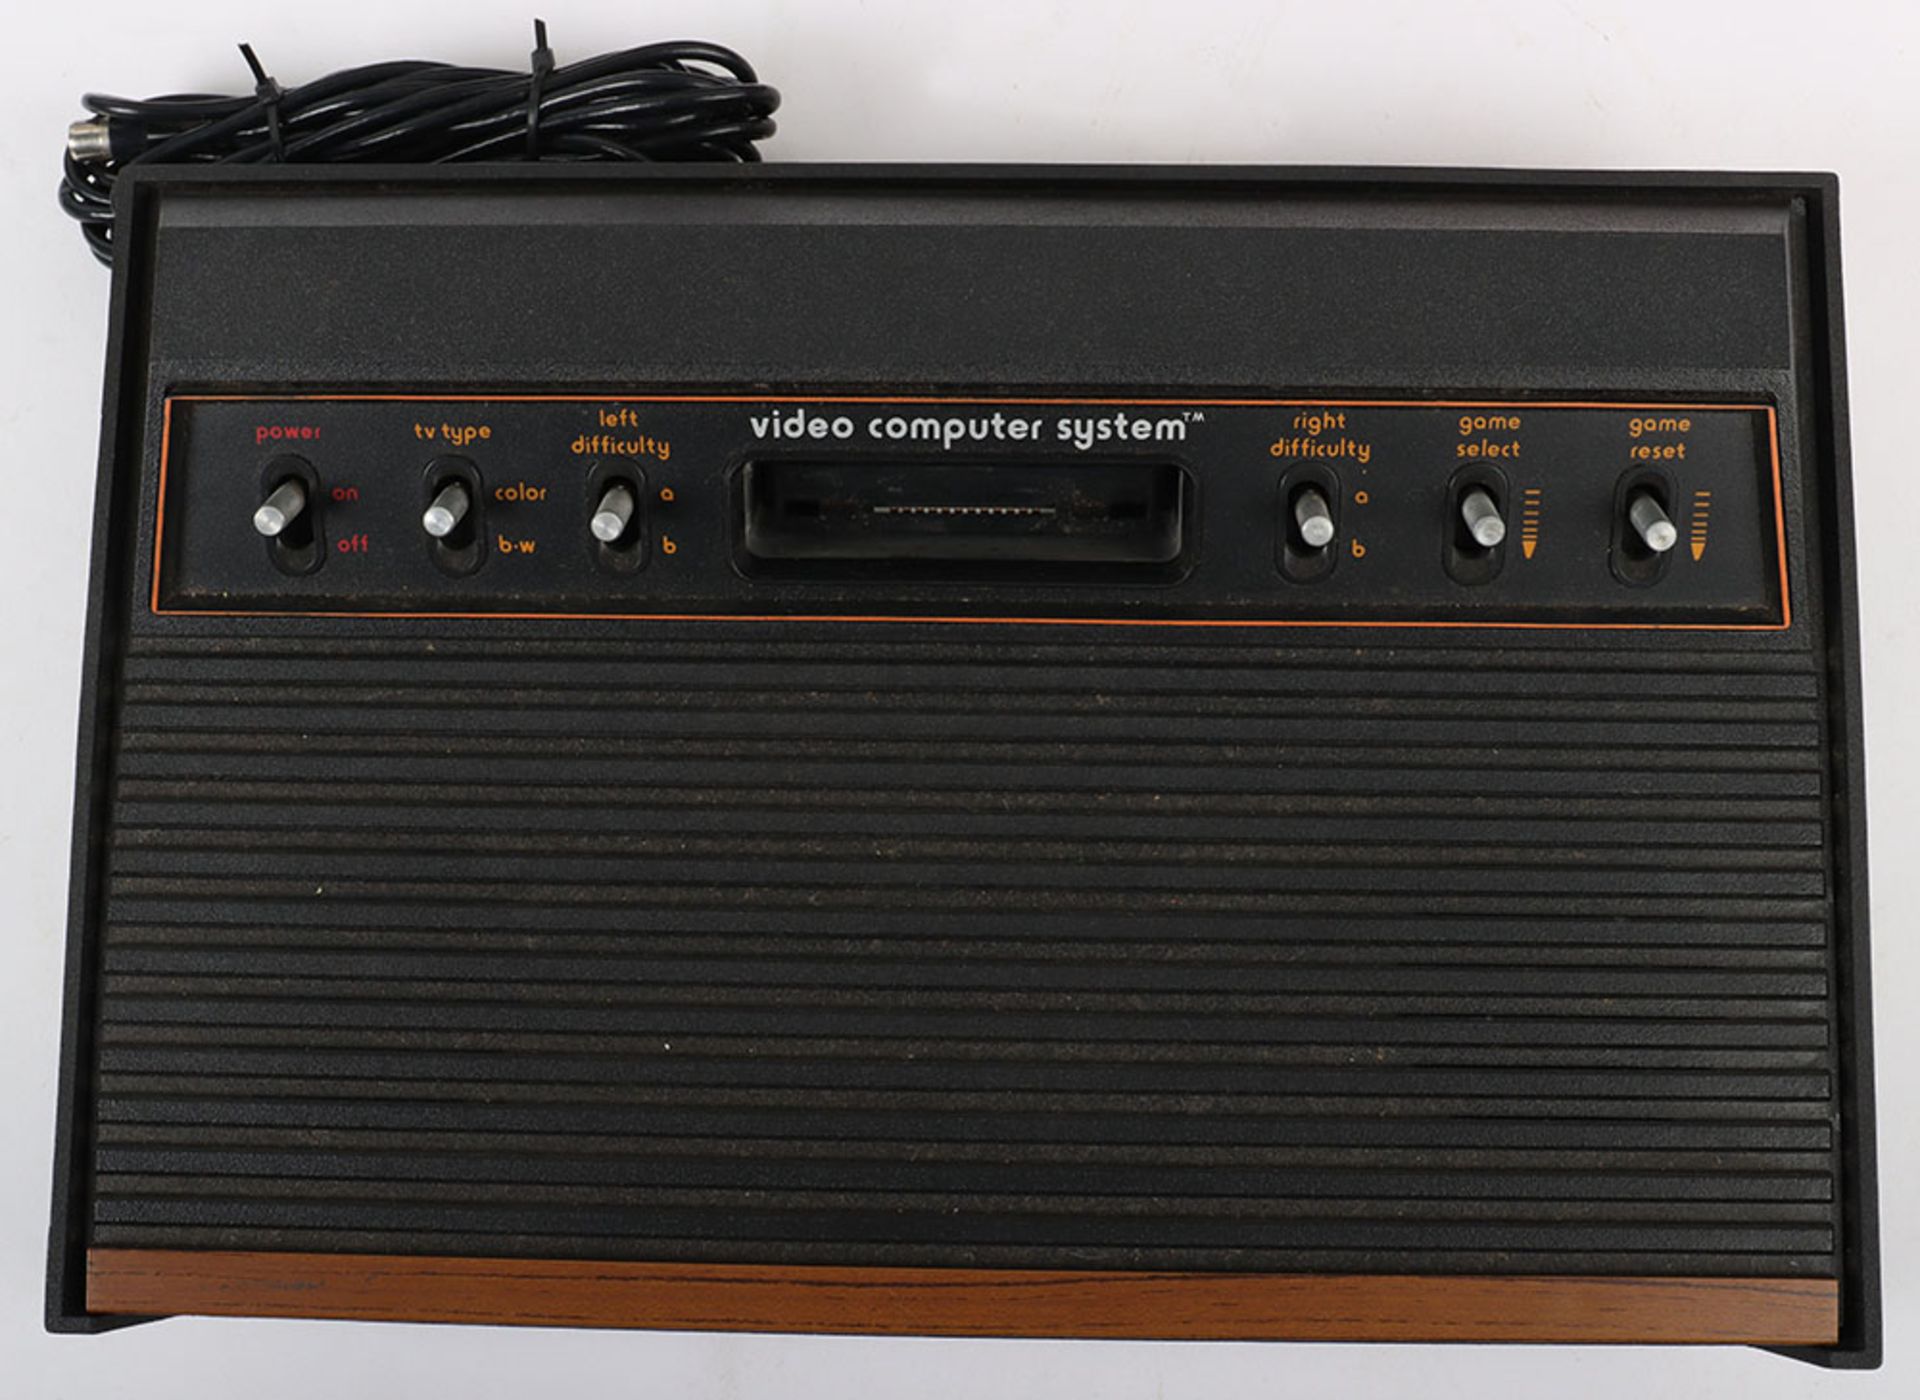 Vintage Atari Video Computer system CX-2600 boxed complete - Image 7 of 8